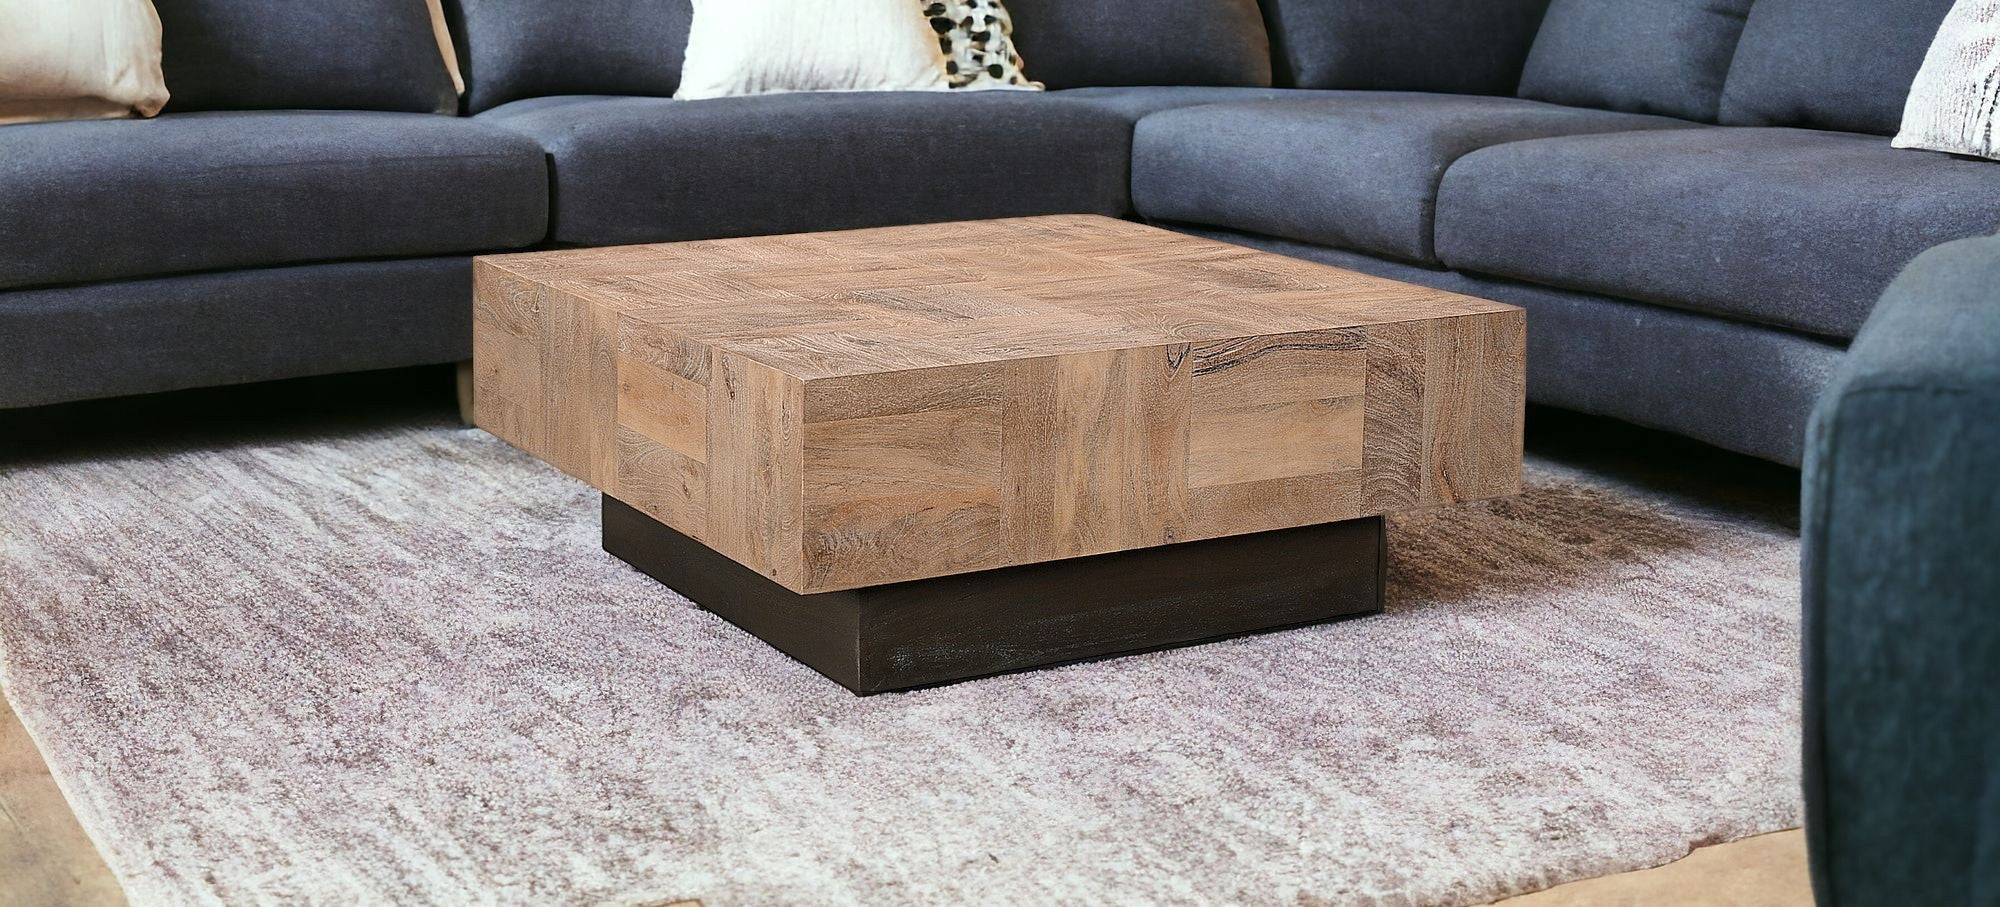 40" Brown And Black Solid Wood Square Coffee Table